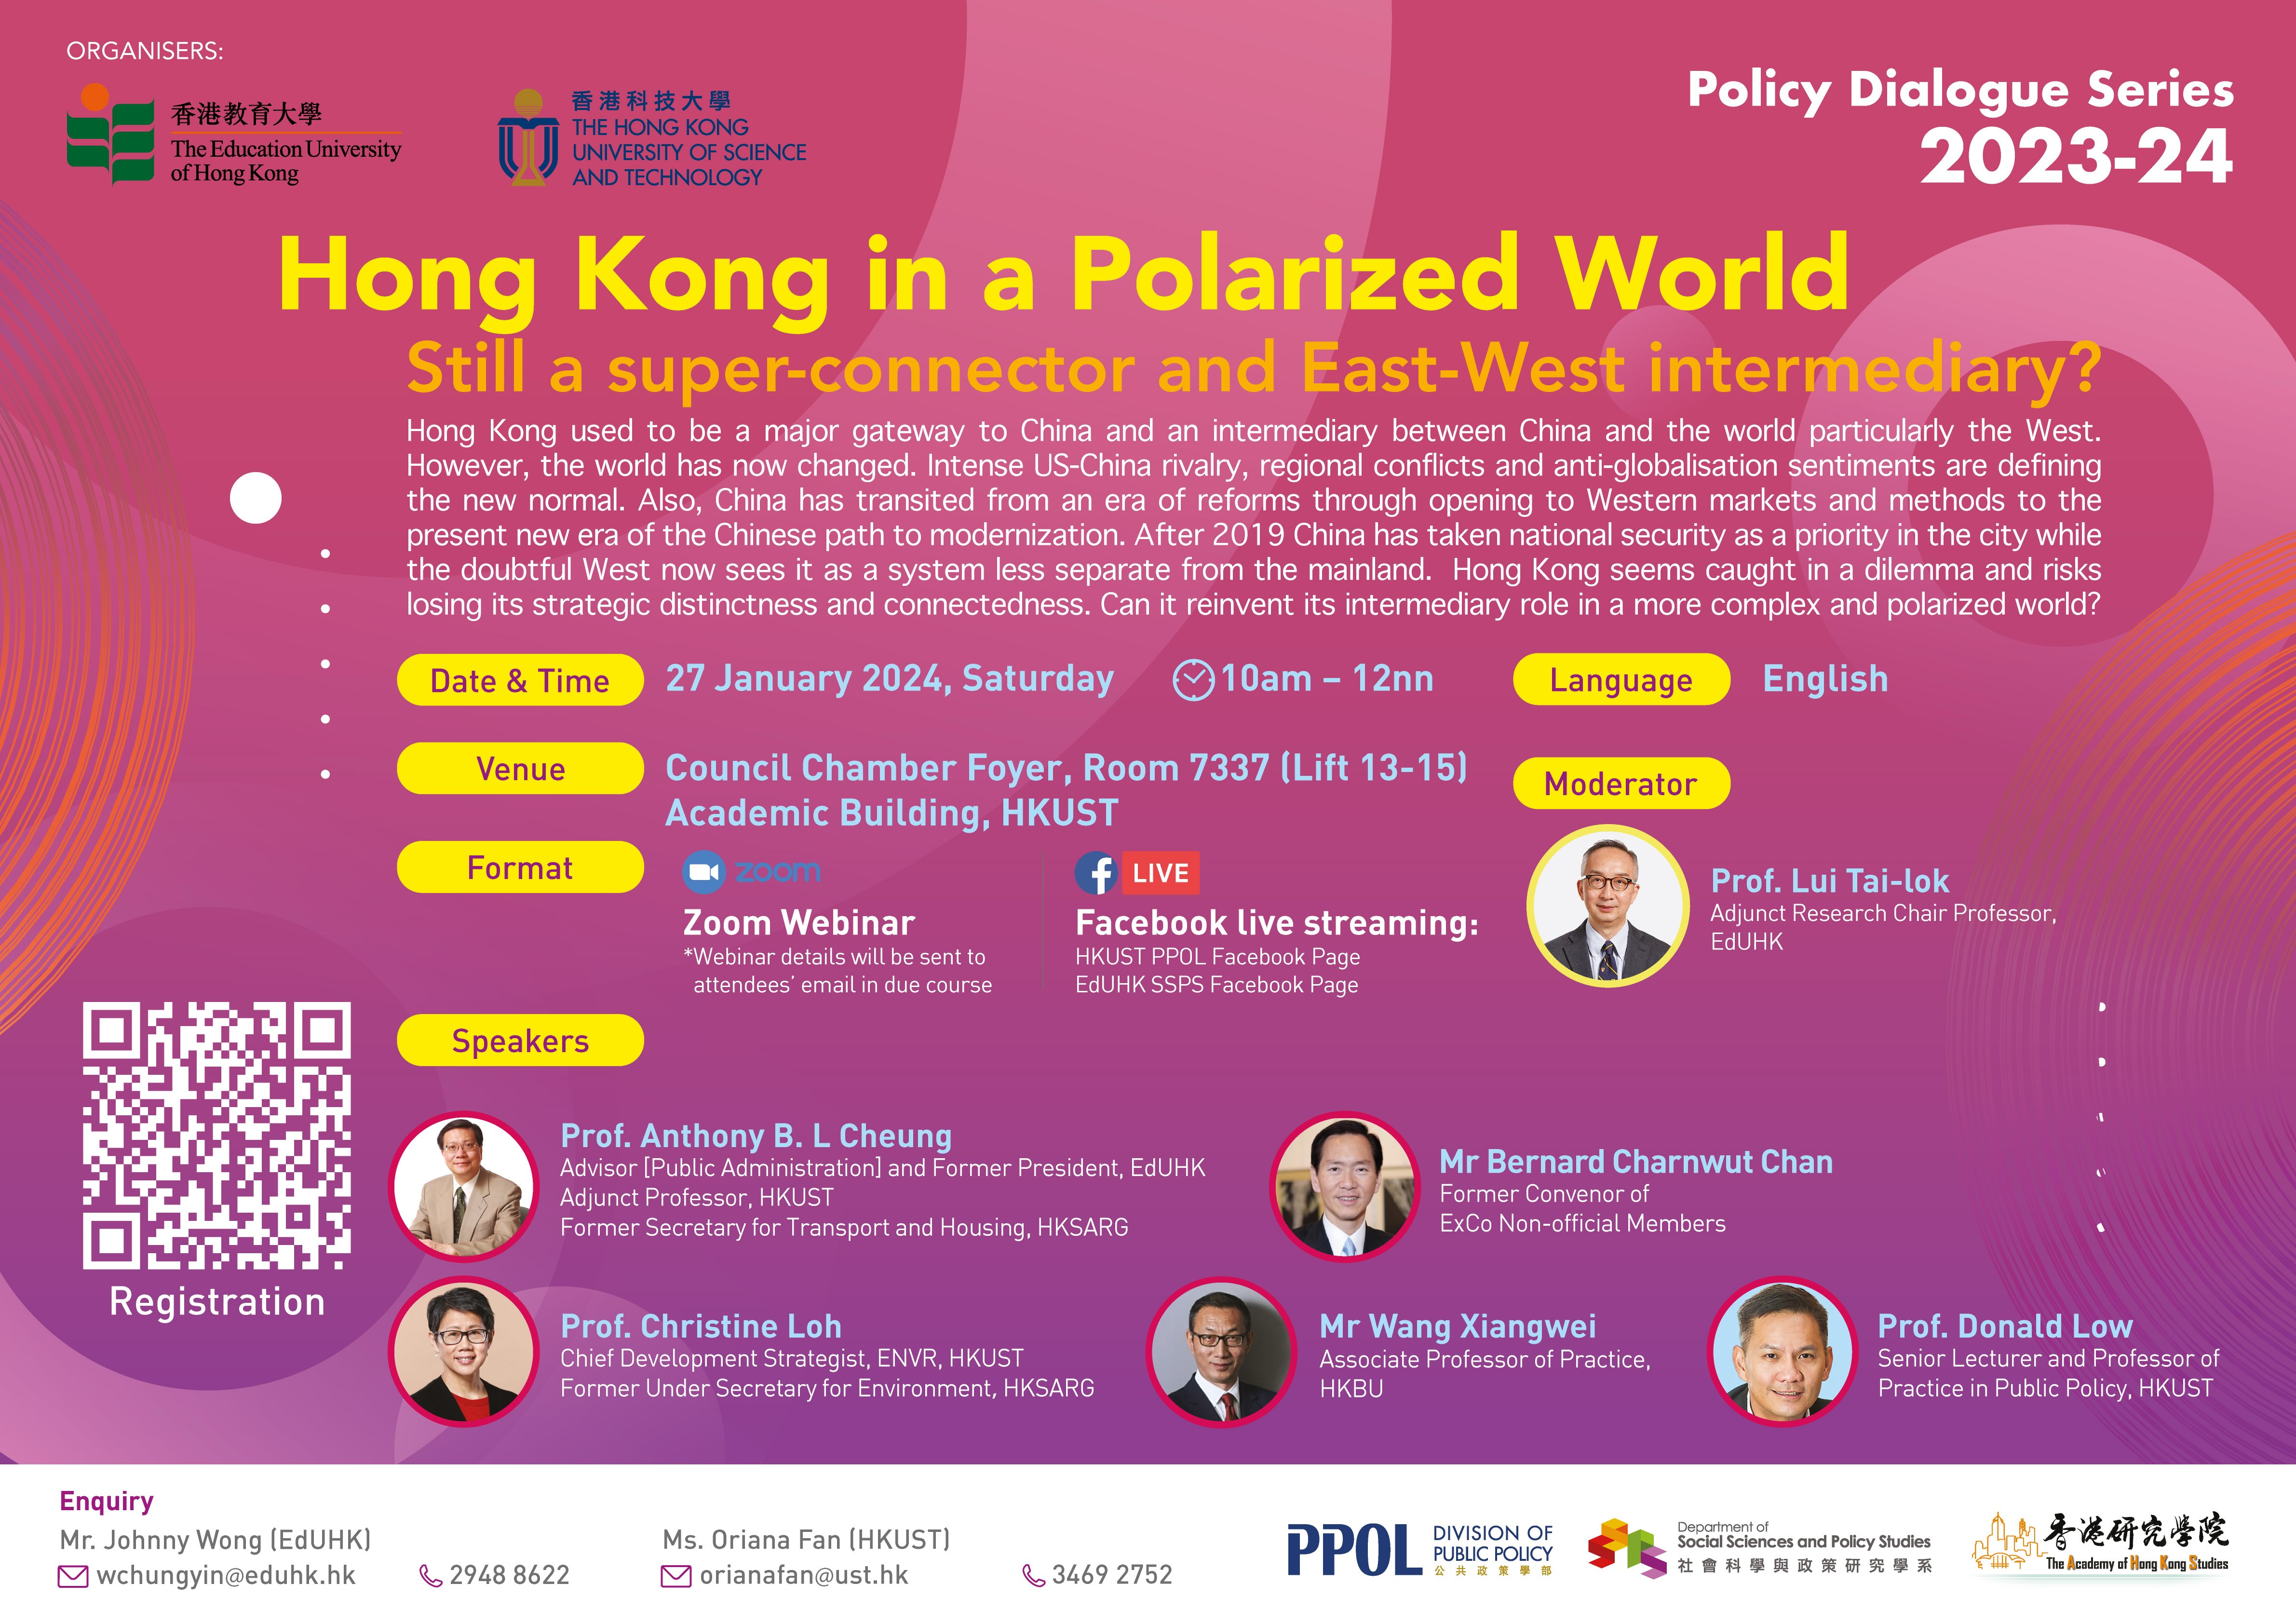 Hong Kong in a Polarized World: Still a Super-connector and East-West Intermediary